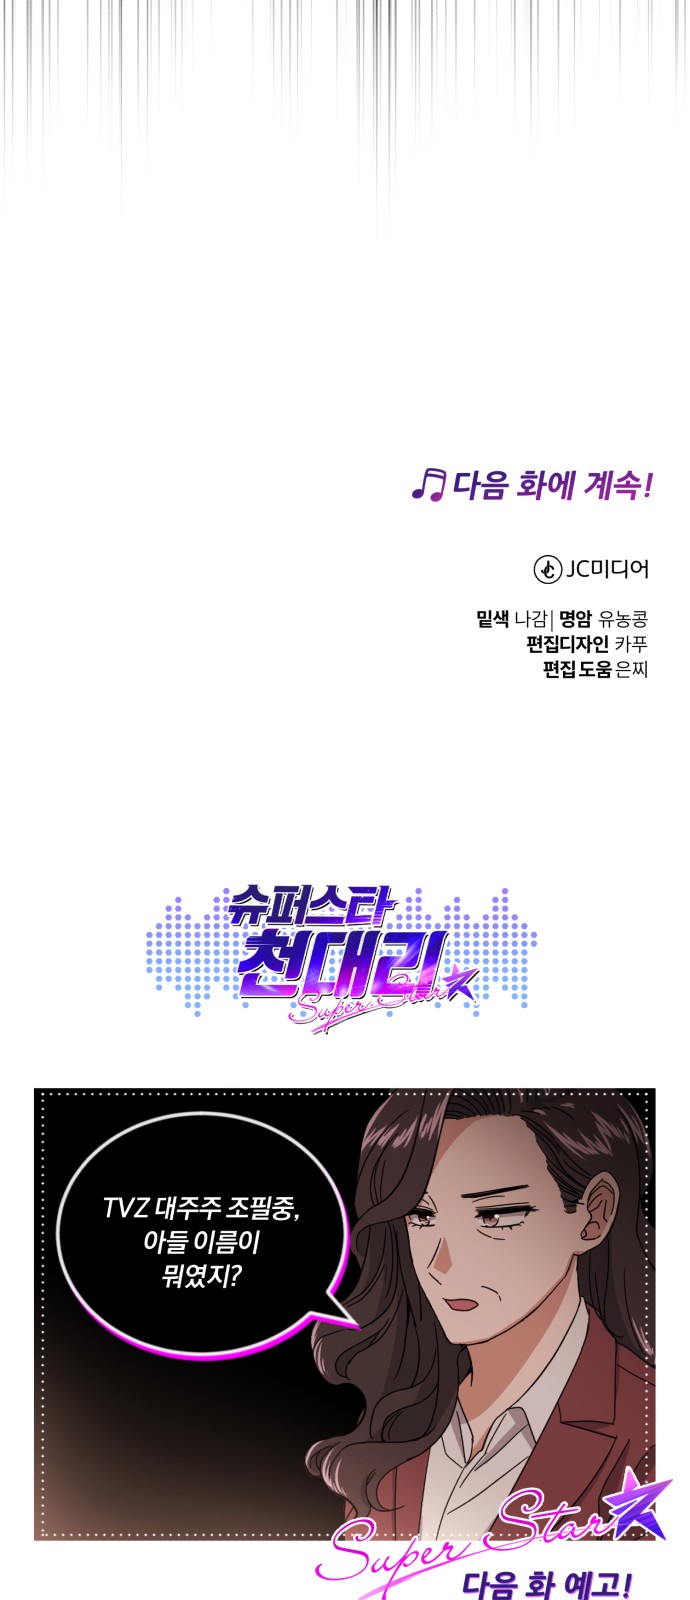 Superstar Cheon Dae-ri - Chapter 48 - Page 85